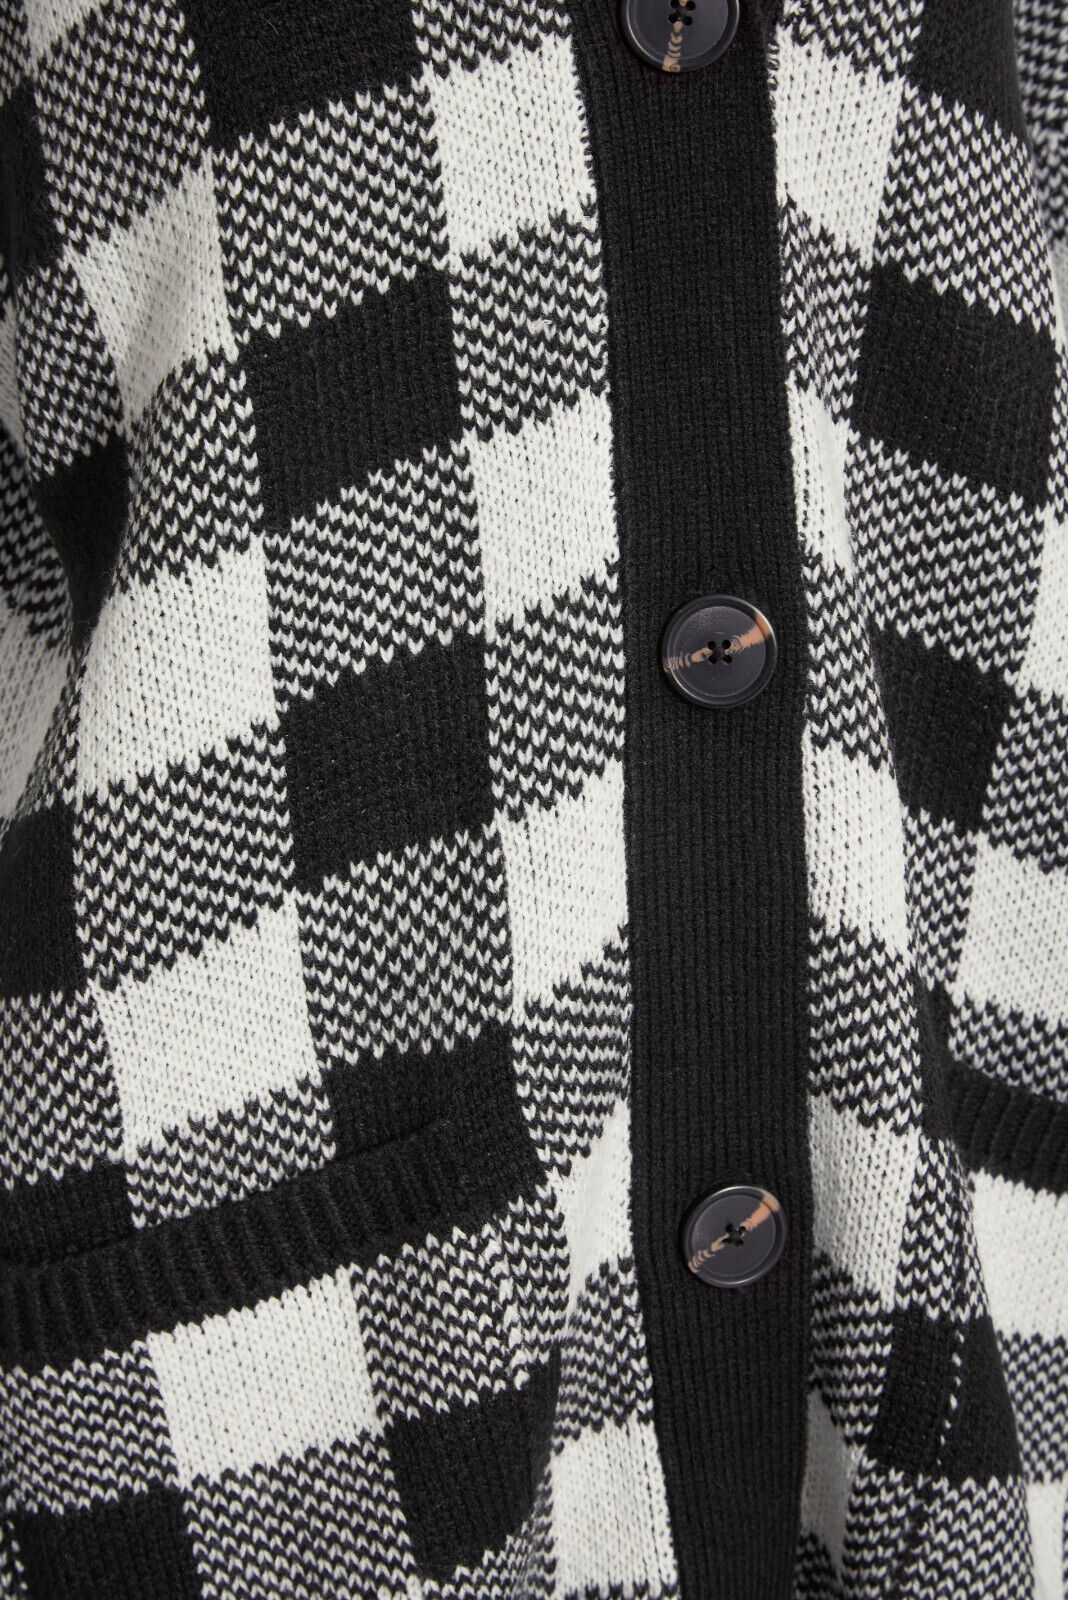 LTS Tall Black Gingham Button Knitted Cardigan Size 10-12